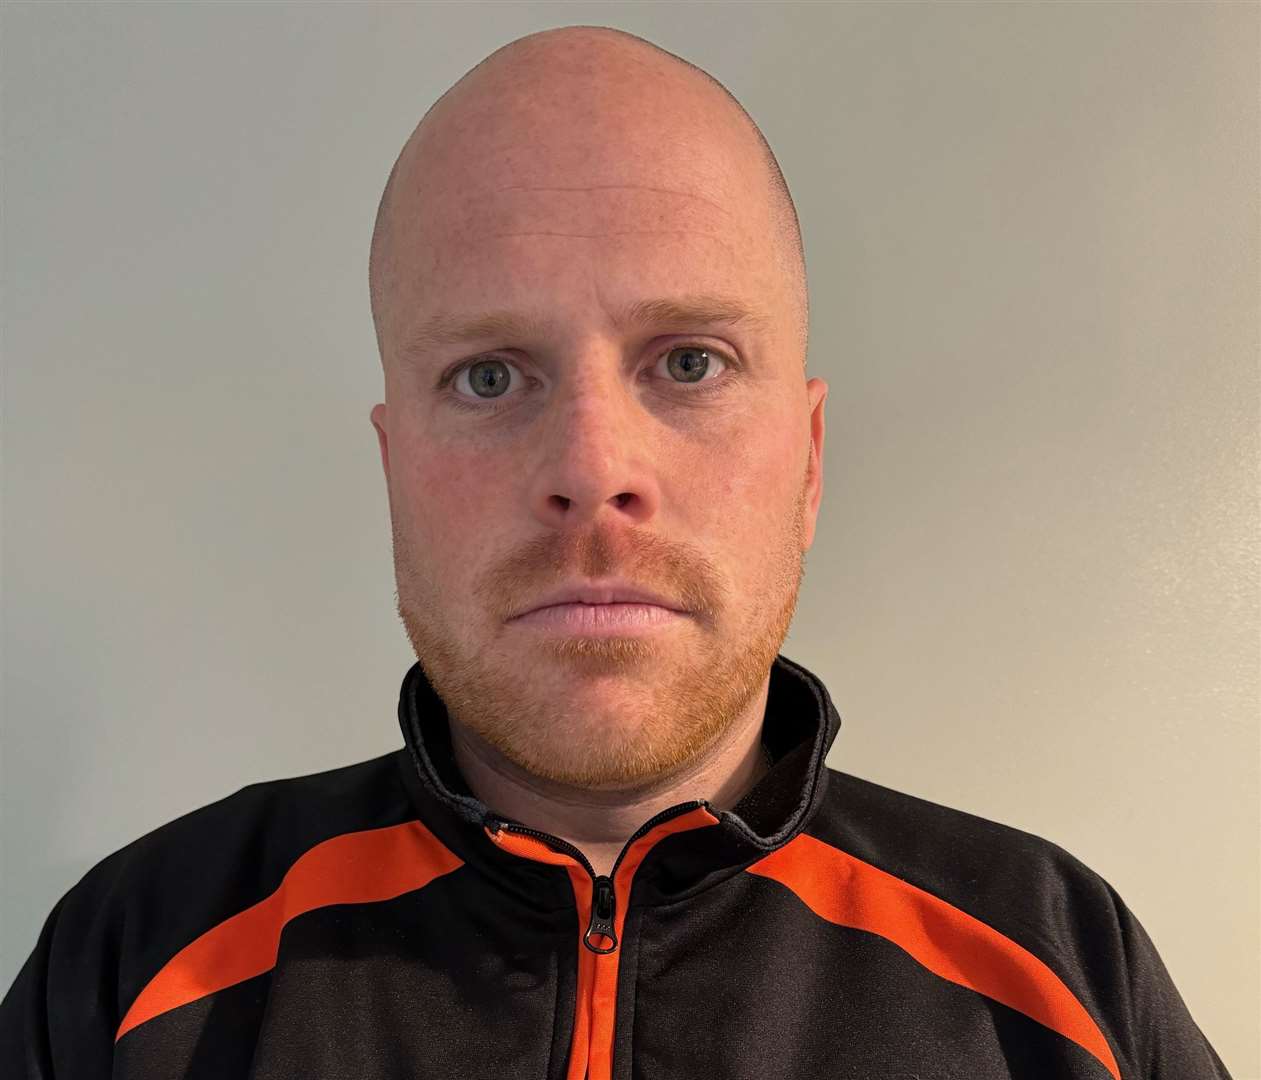 Lordswood Youth FC’s child welfare officer, Ashley Smith, 37